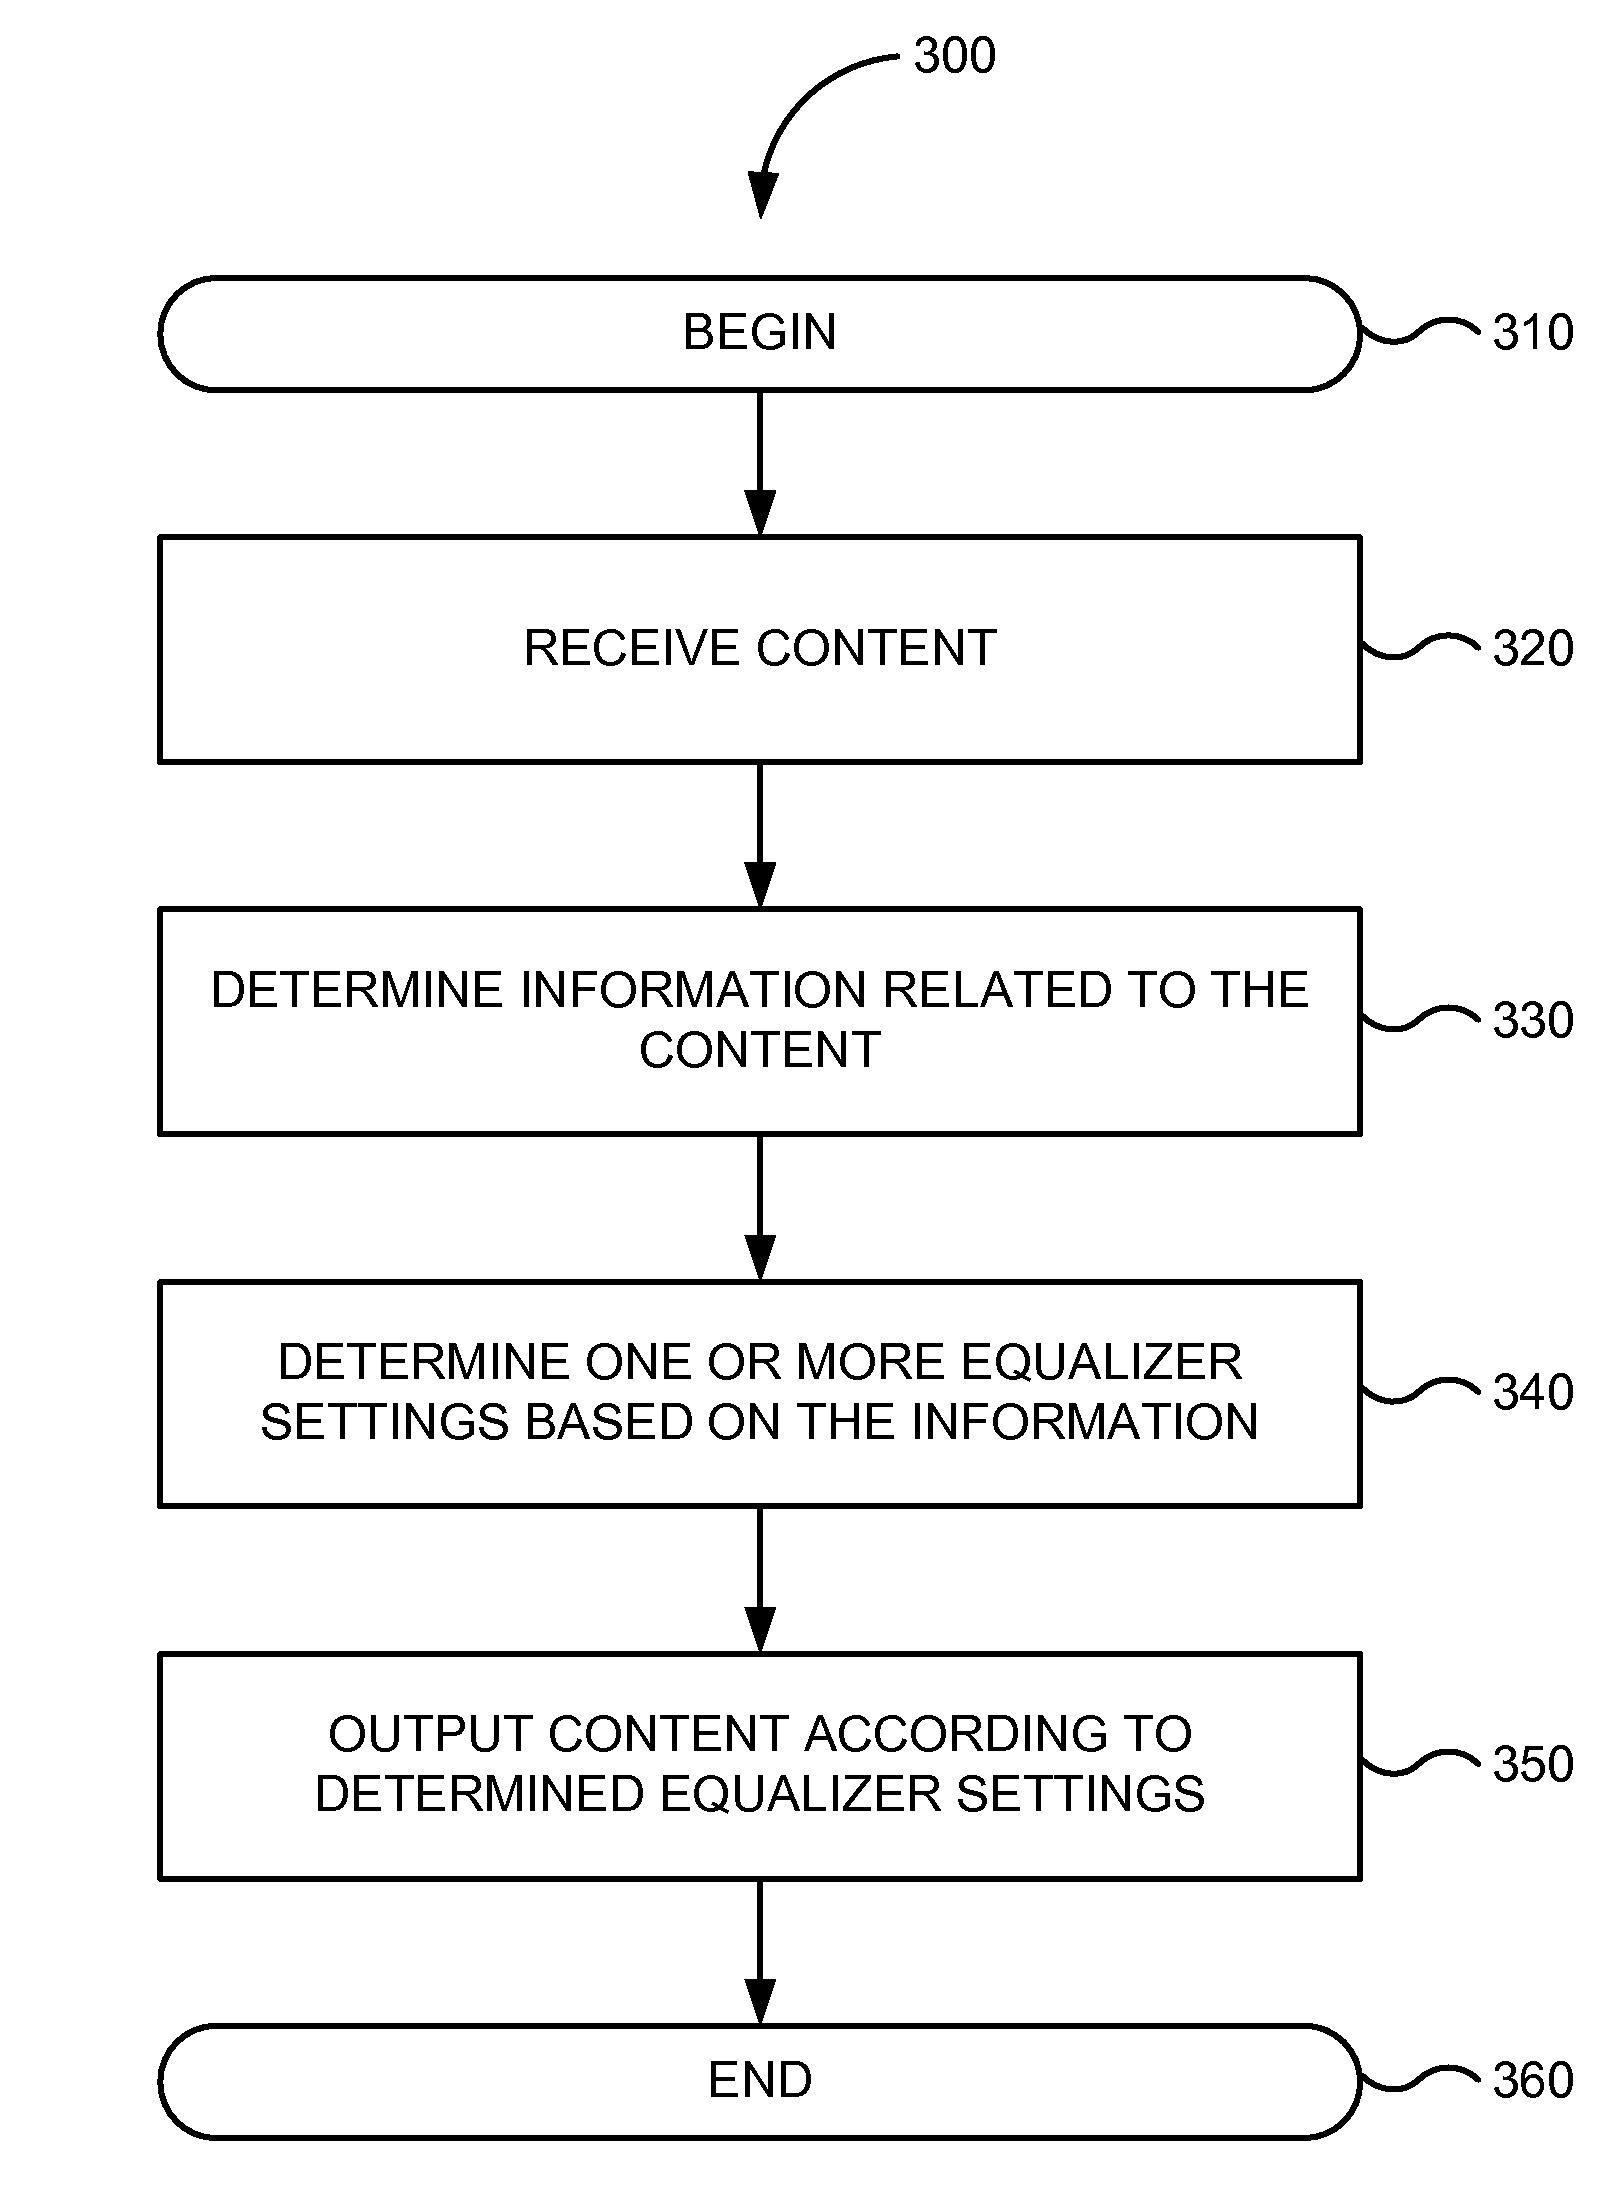 Automatic equalizer adjustment setting for playback of media assets